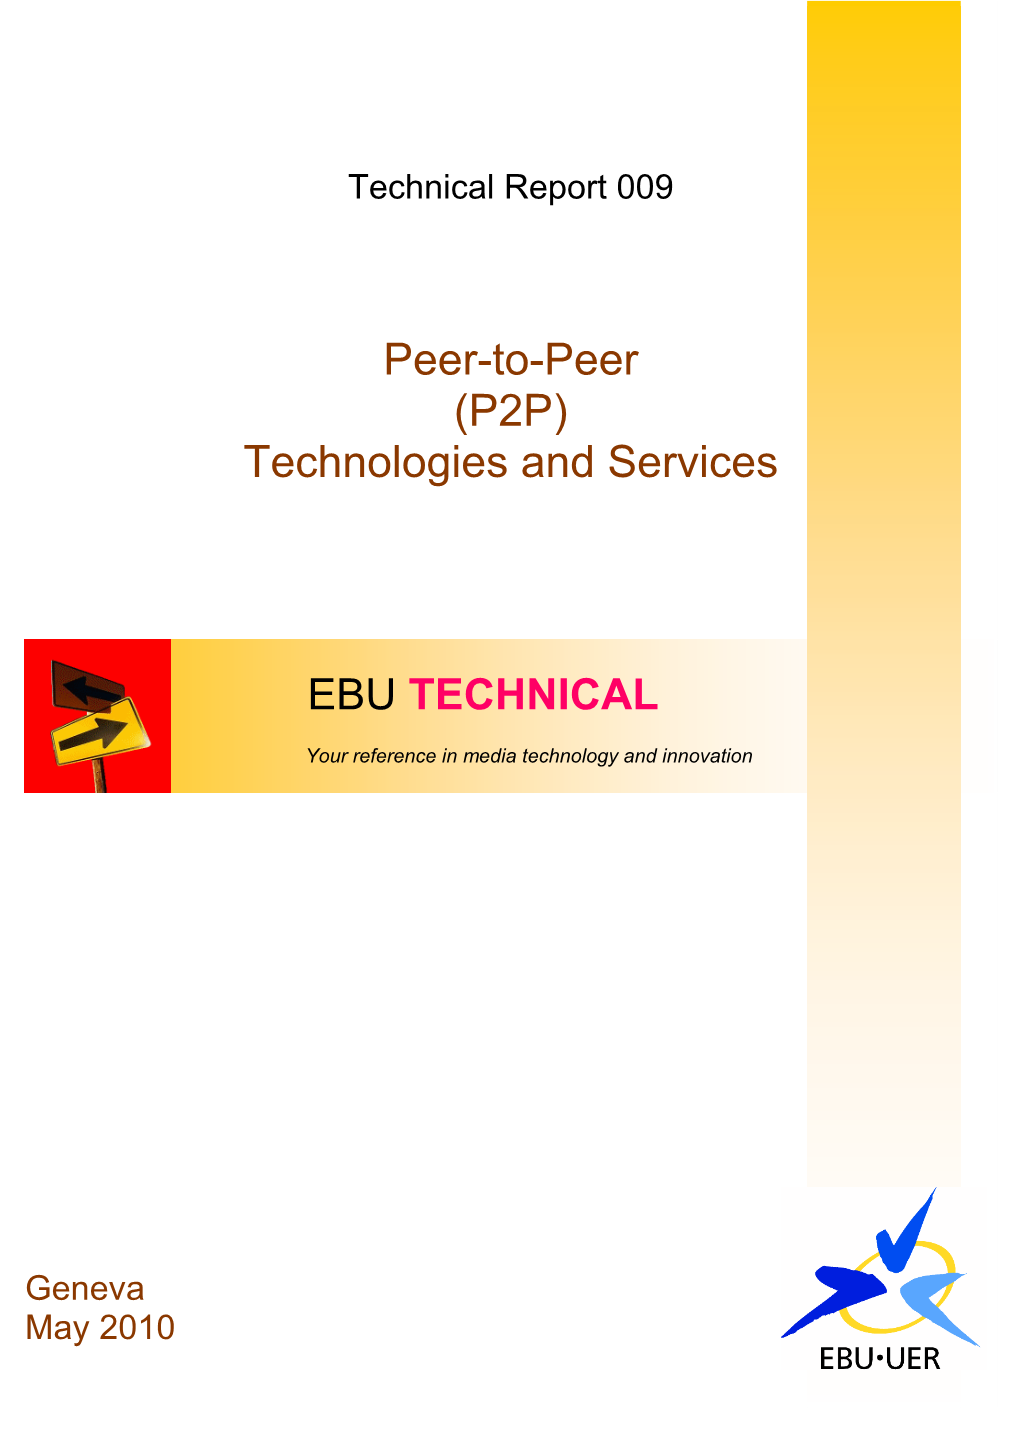 Peer-To-Peer (P2P) Technologies and Services